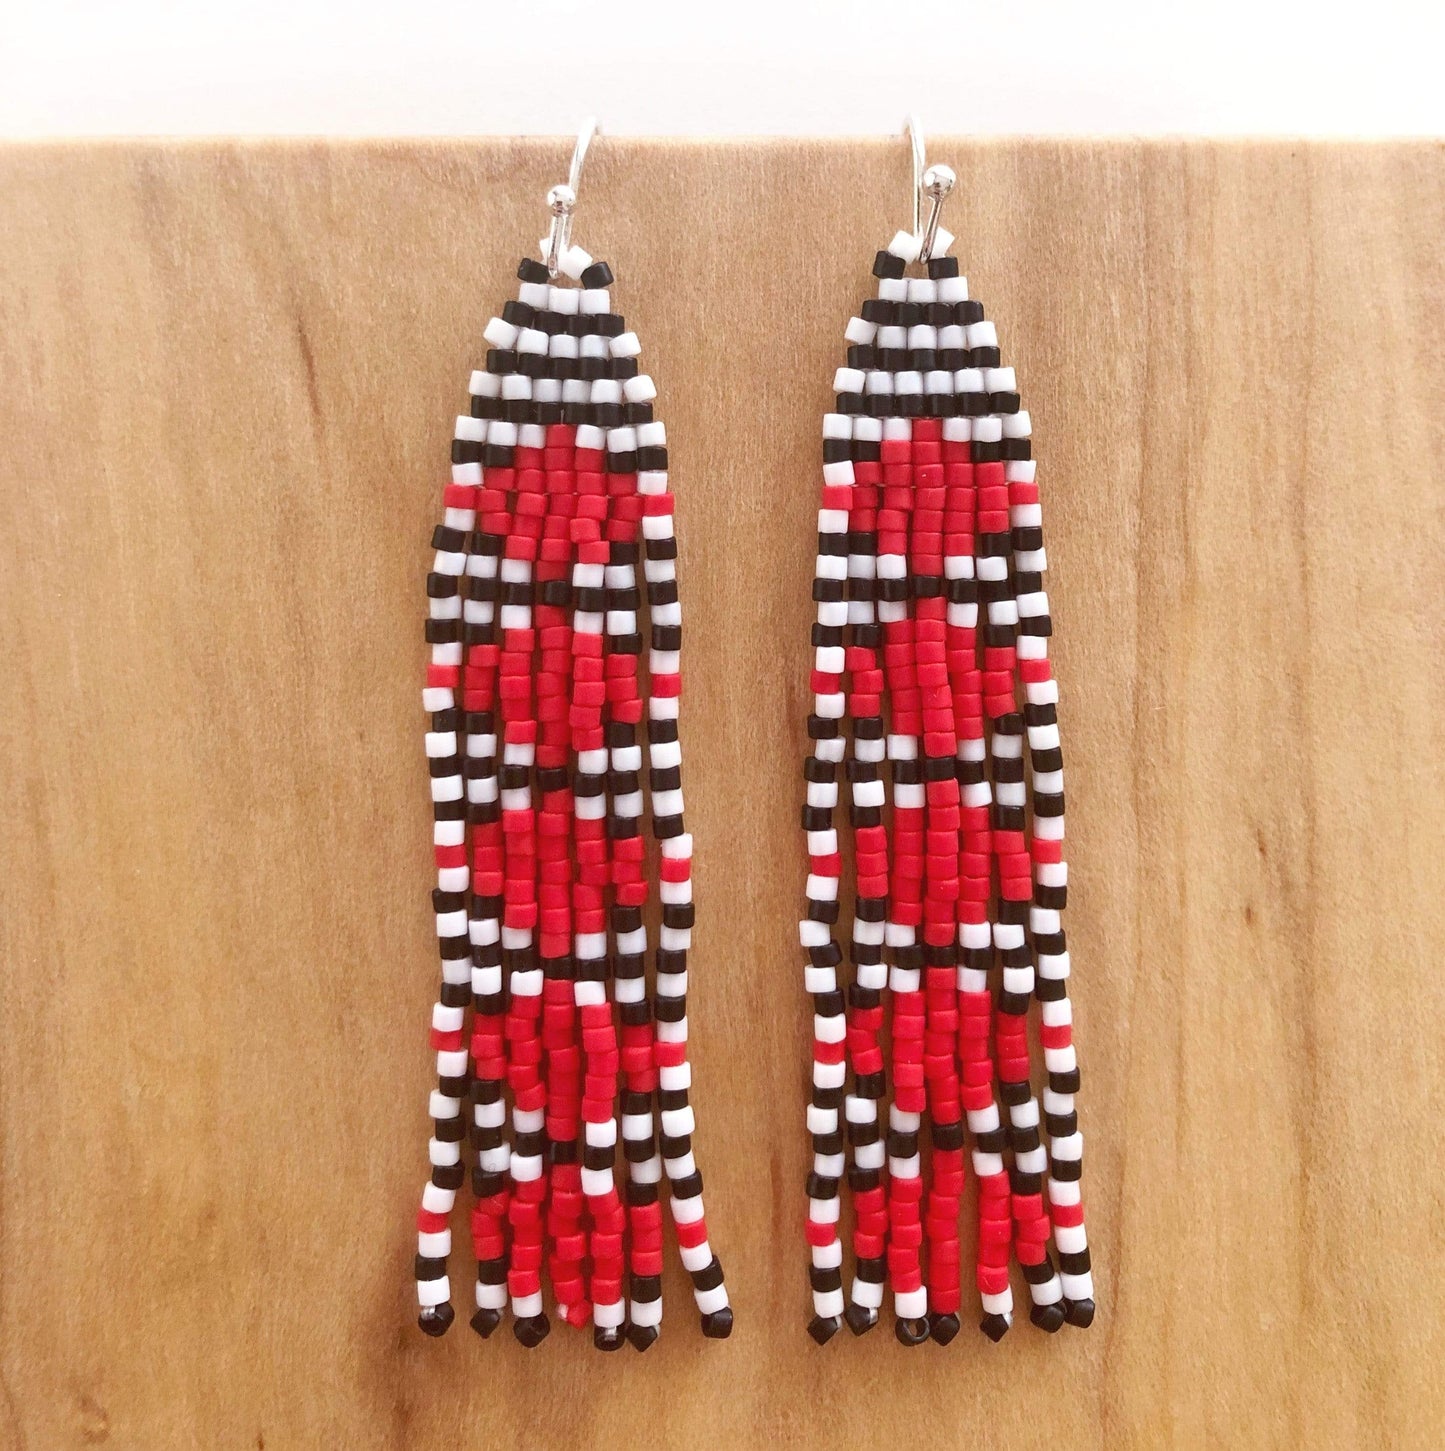 Lillie Nell Pokni Earrings in Pileated